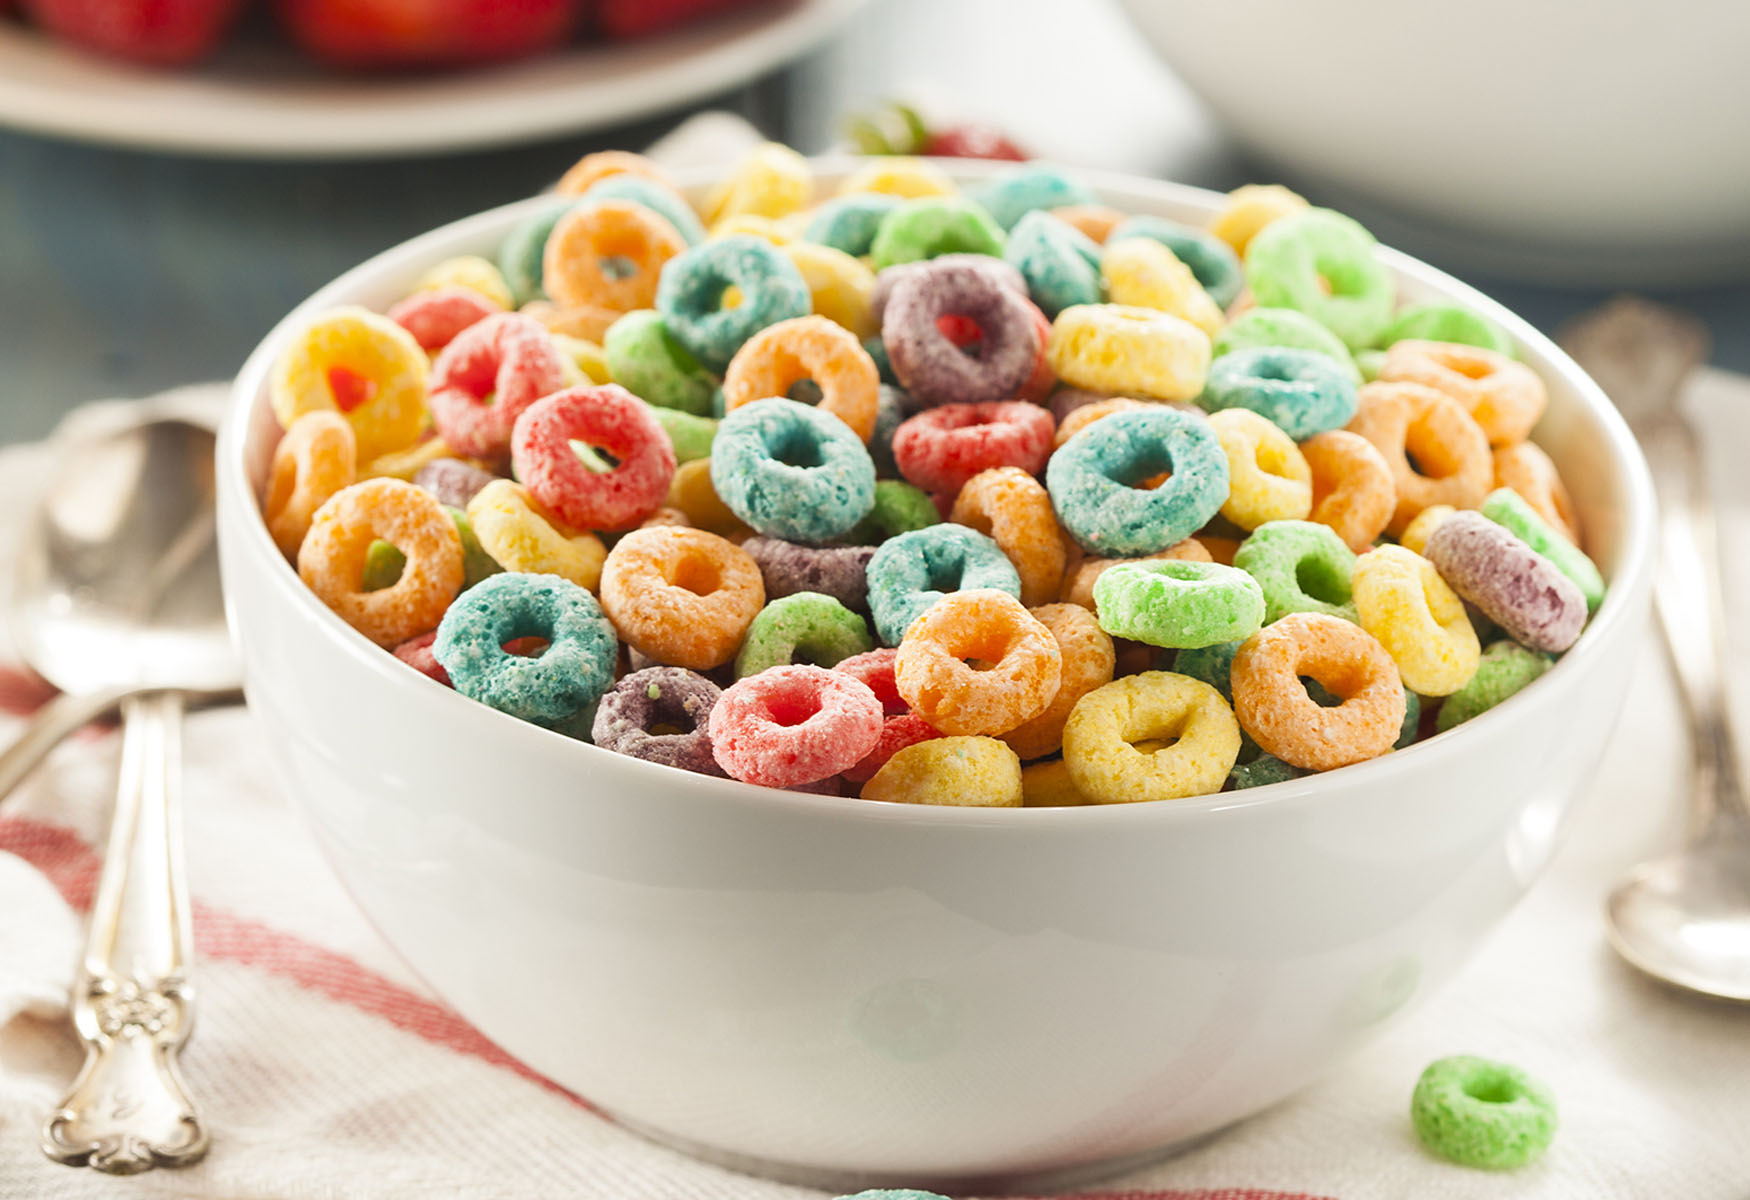 19-bowl-of-cereal-nutrition-facts